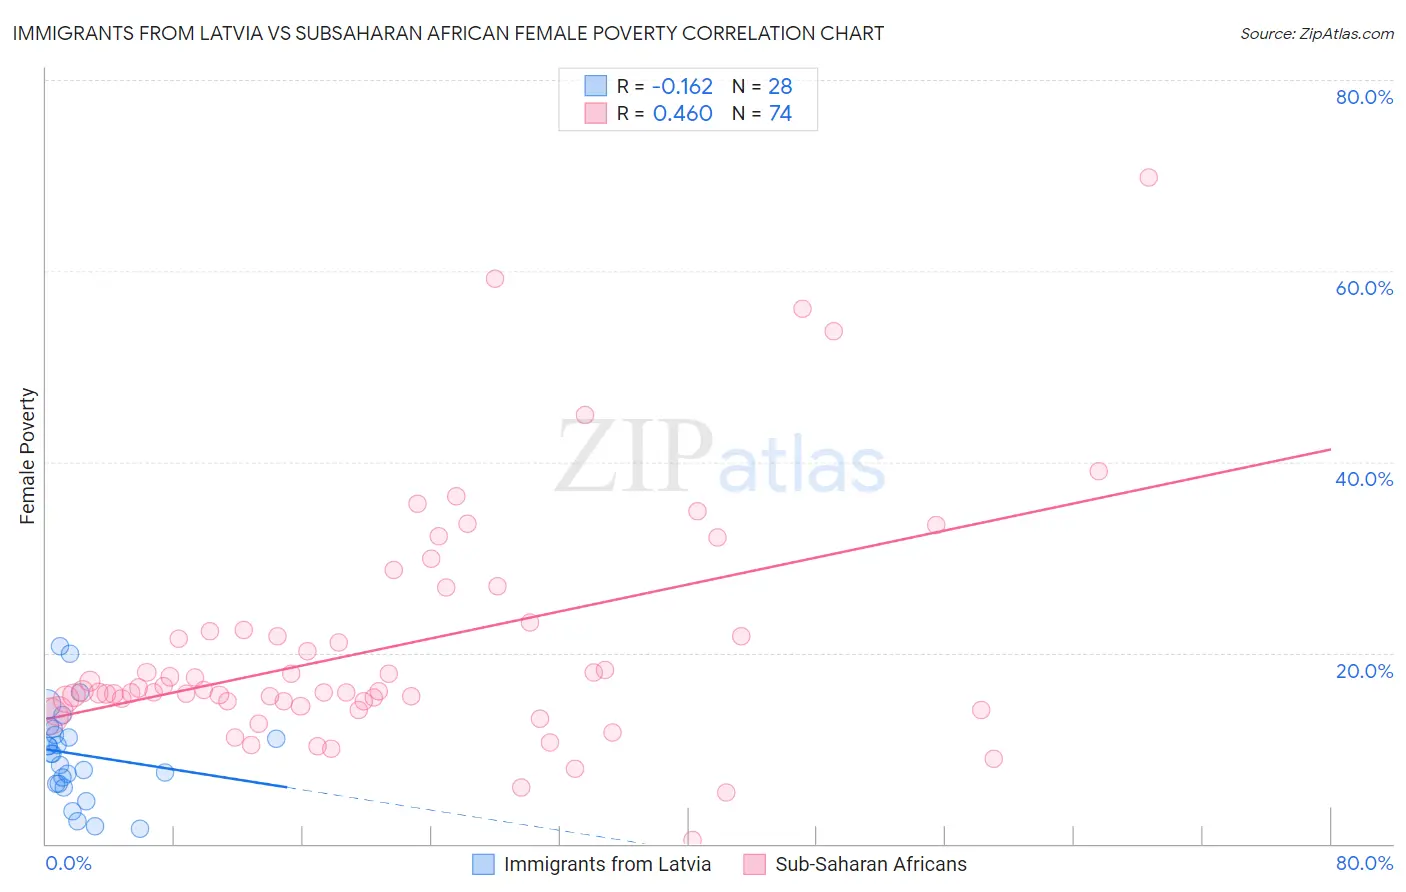 Immigrants from Latvia vs Subsaharan African Female Poverty